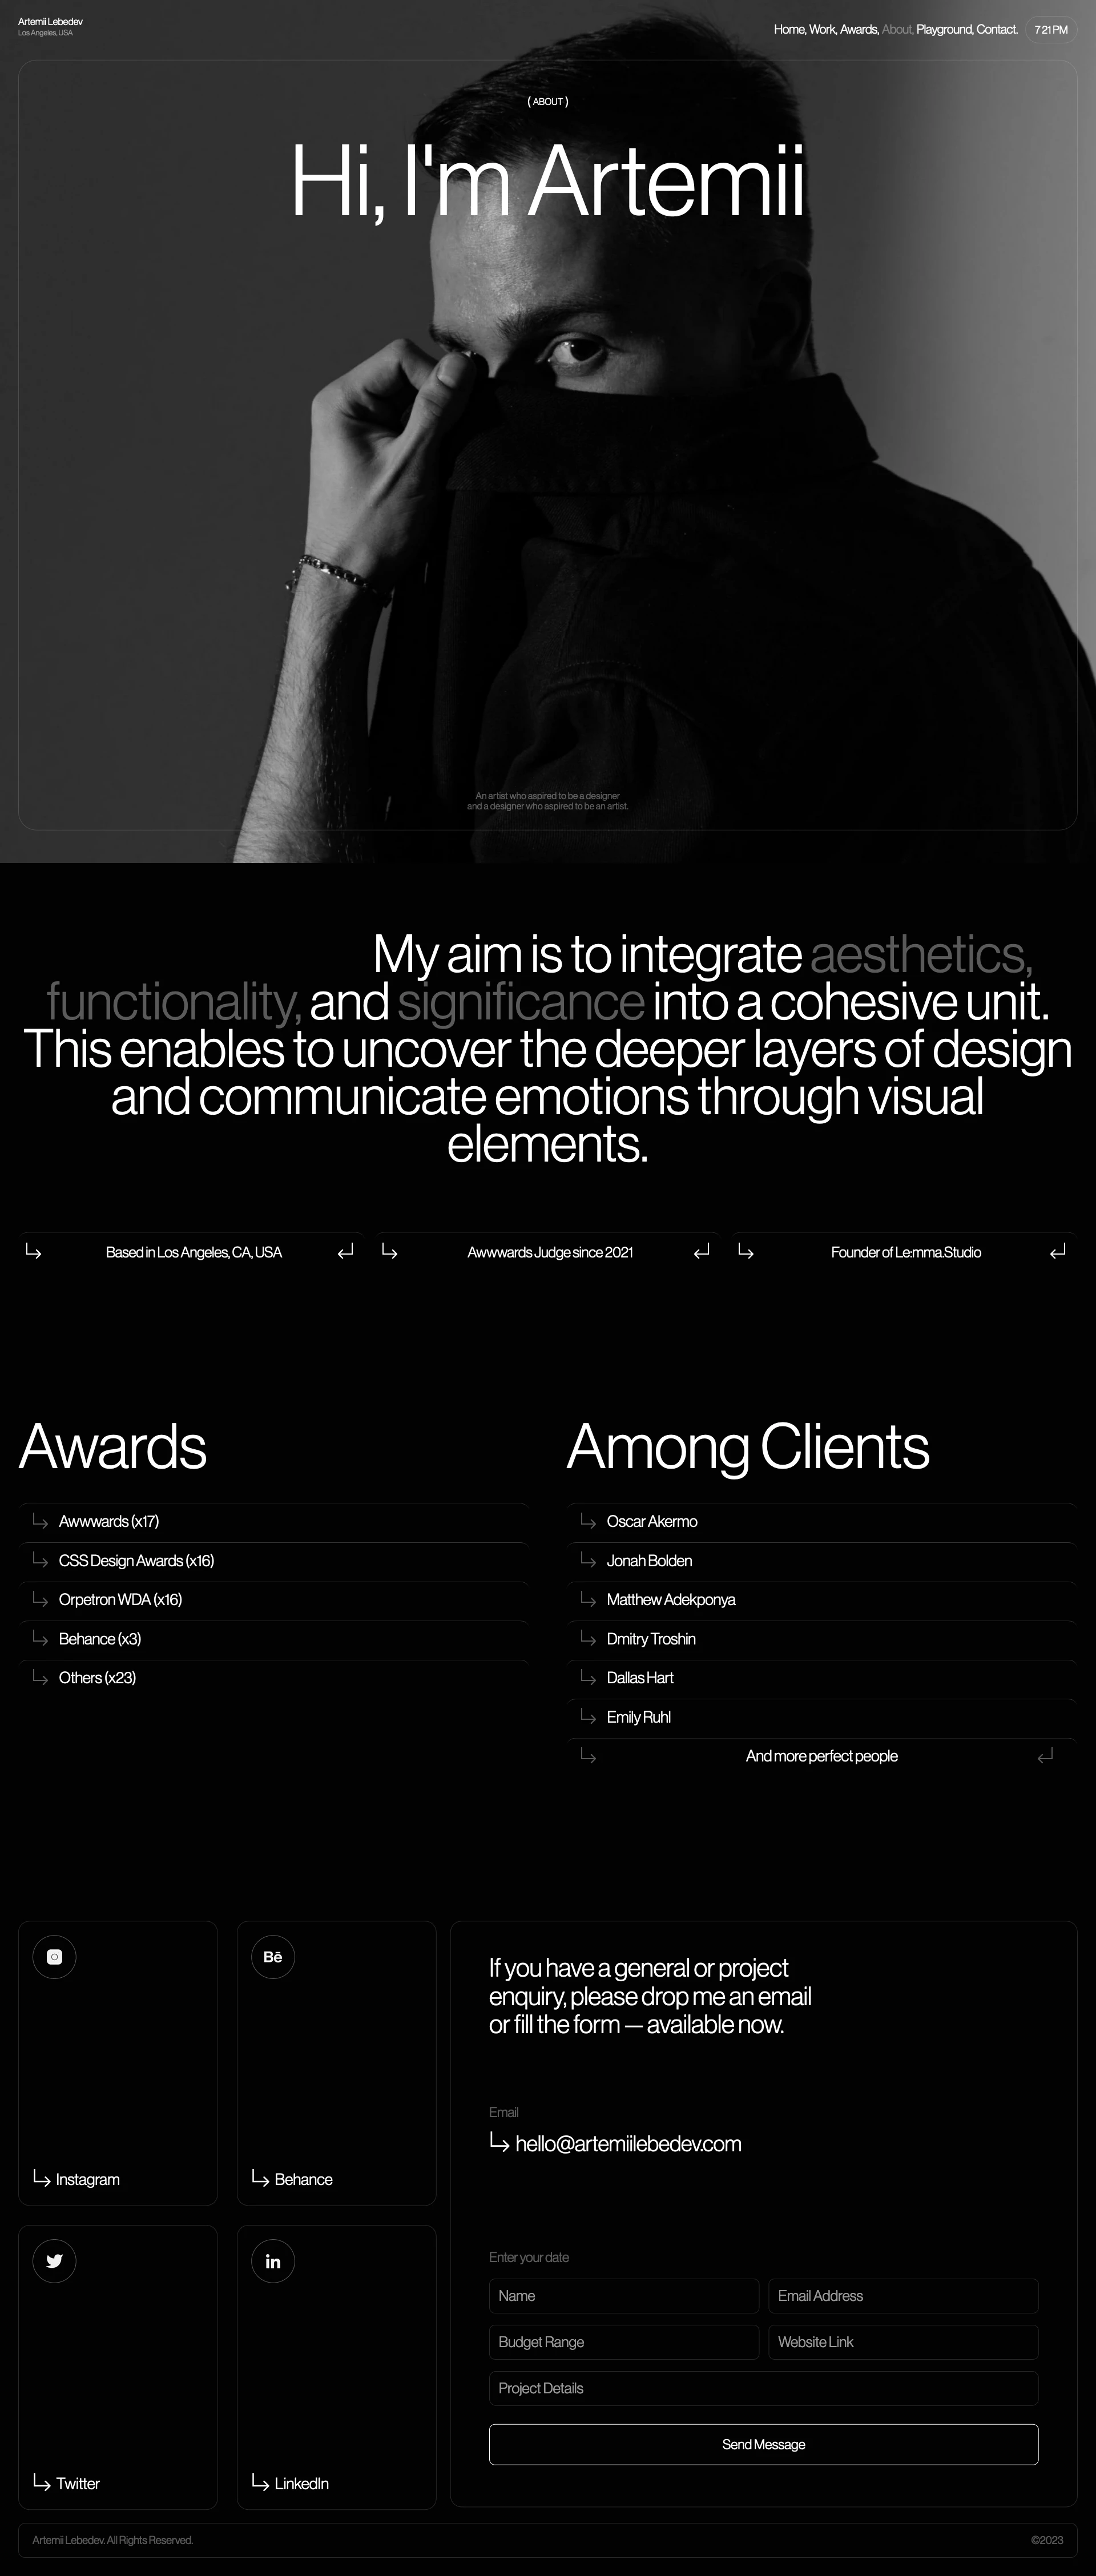 Artemii Lebedev Landing Page Example: Portfolio of Artemii Lebedev, award-winning Designer, Founder & Art Director Lemma.Studio. Product & Visual design, Mobile & Web 2/3.0 projects, Branding, Typography and Animations. My aim is to integrate aesthetics, functionality, and significance into a cohesive unit. This enables to uncover the deeper layers of design and communicate emotions through visual elements.